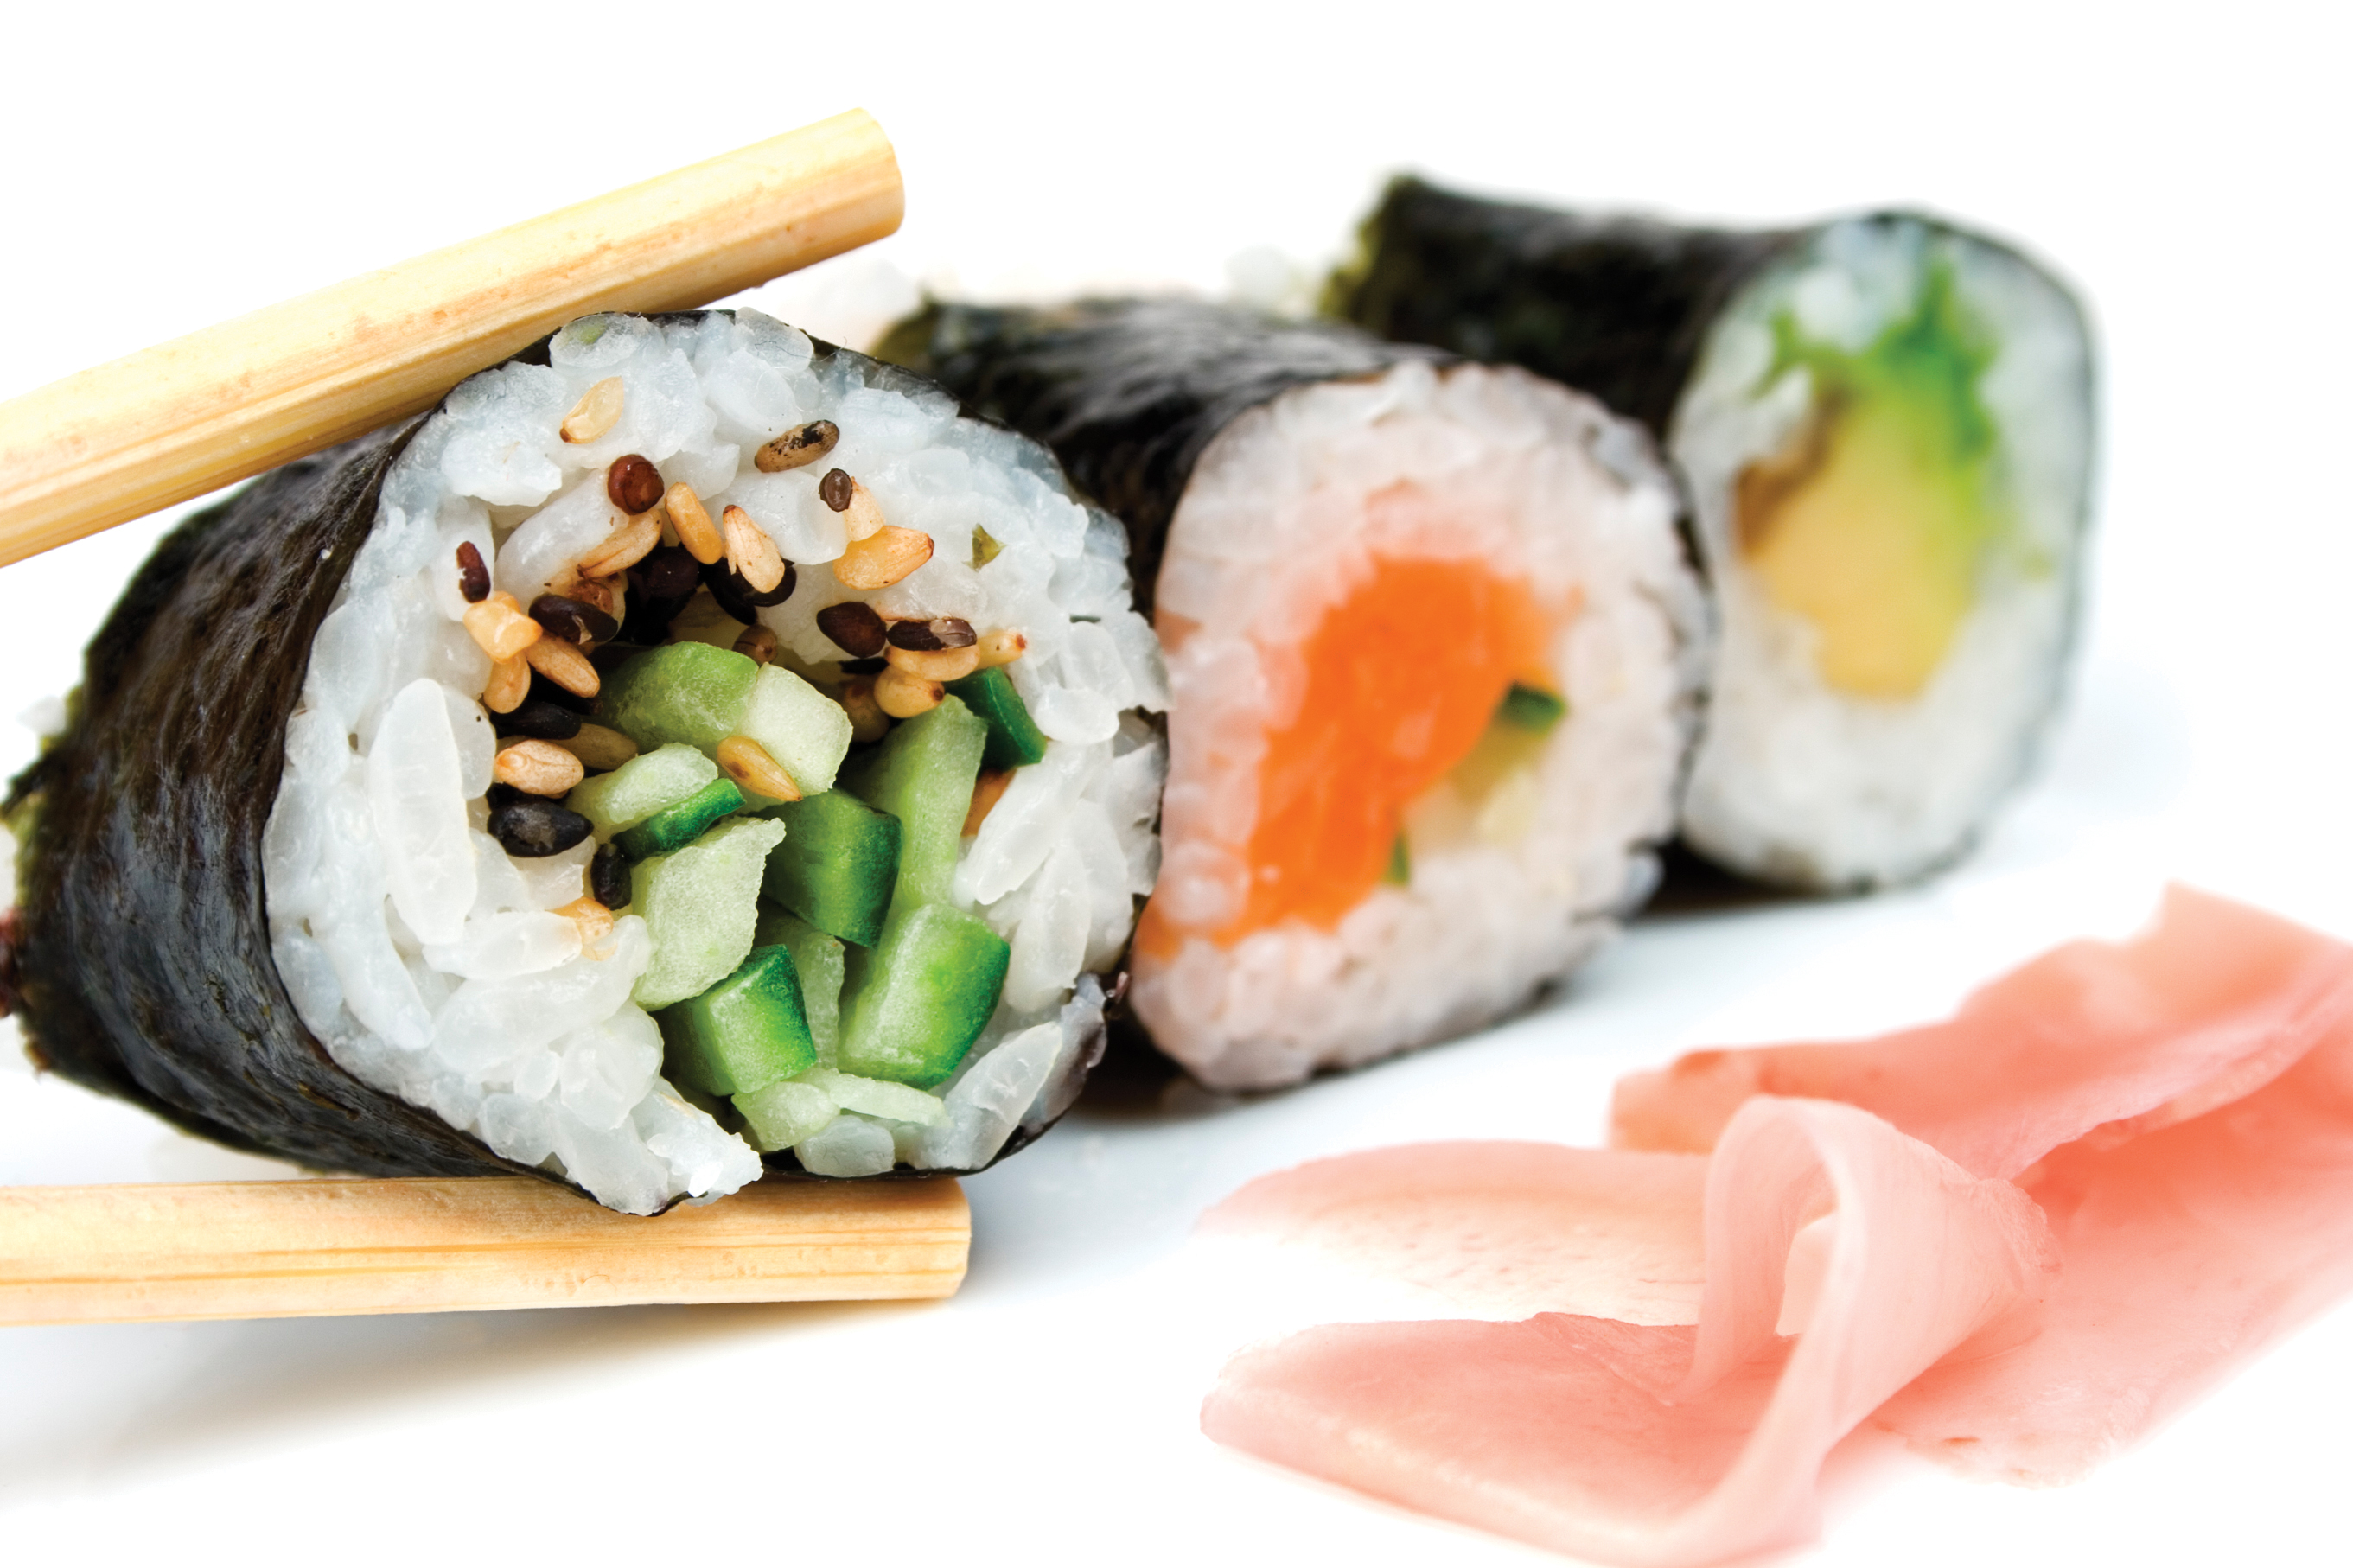 Pluspng Pluspng.com Picture Of Helenu0027S Asian Kitchen Sushi Making Kit Pluspng Pluspng.com   - Sushi, Transparent background PNG HD thumbnail